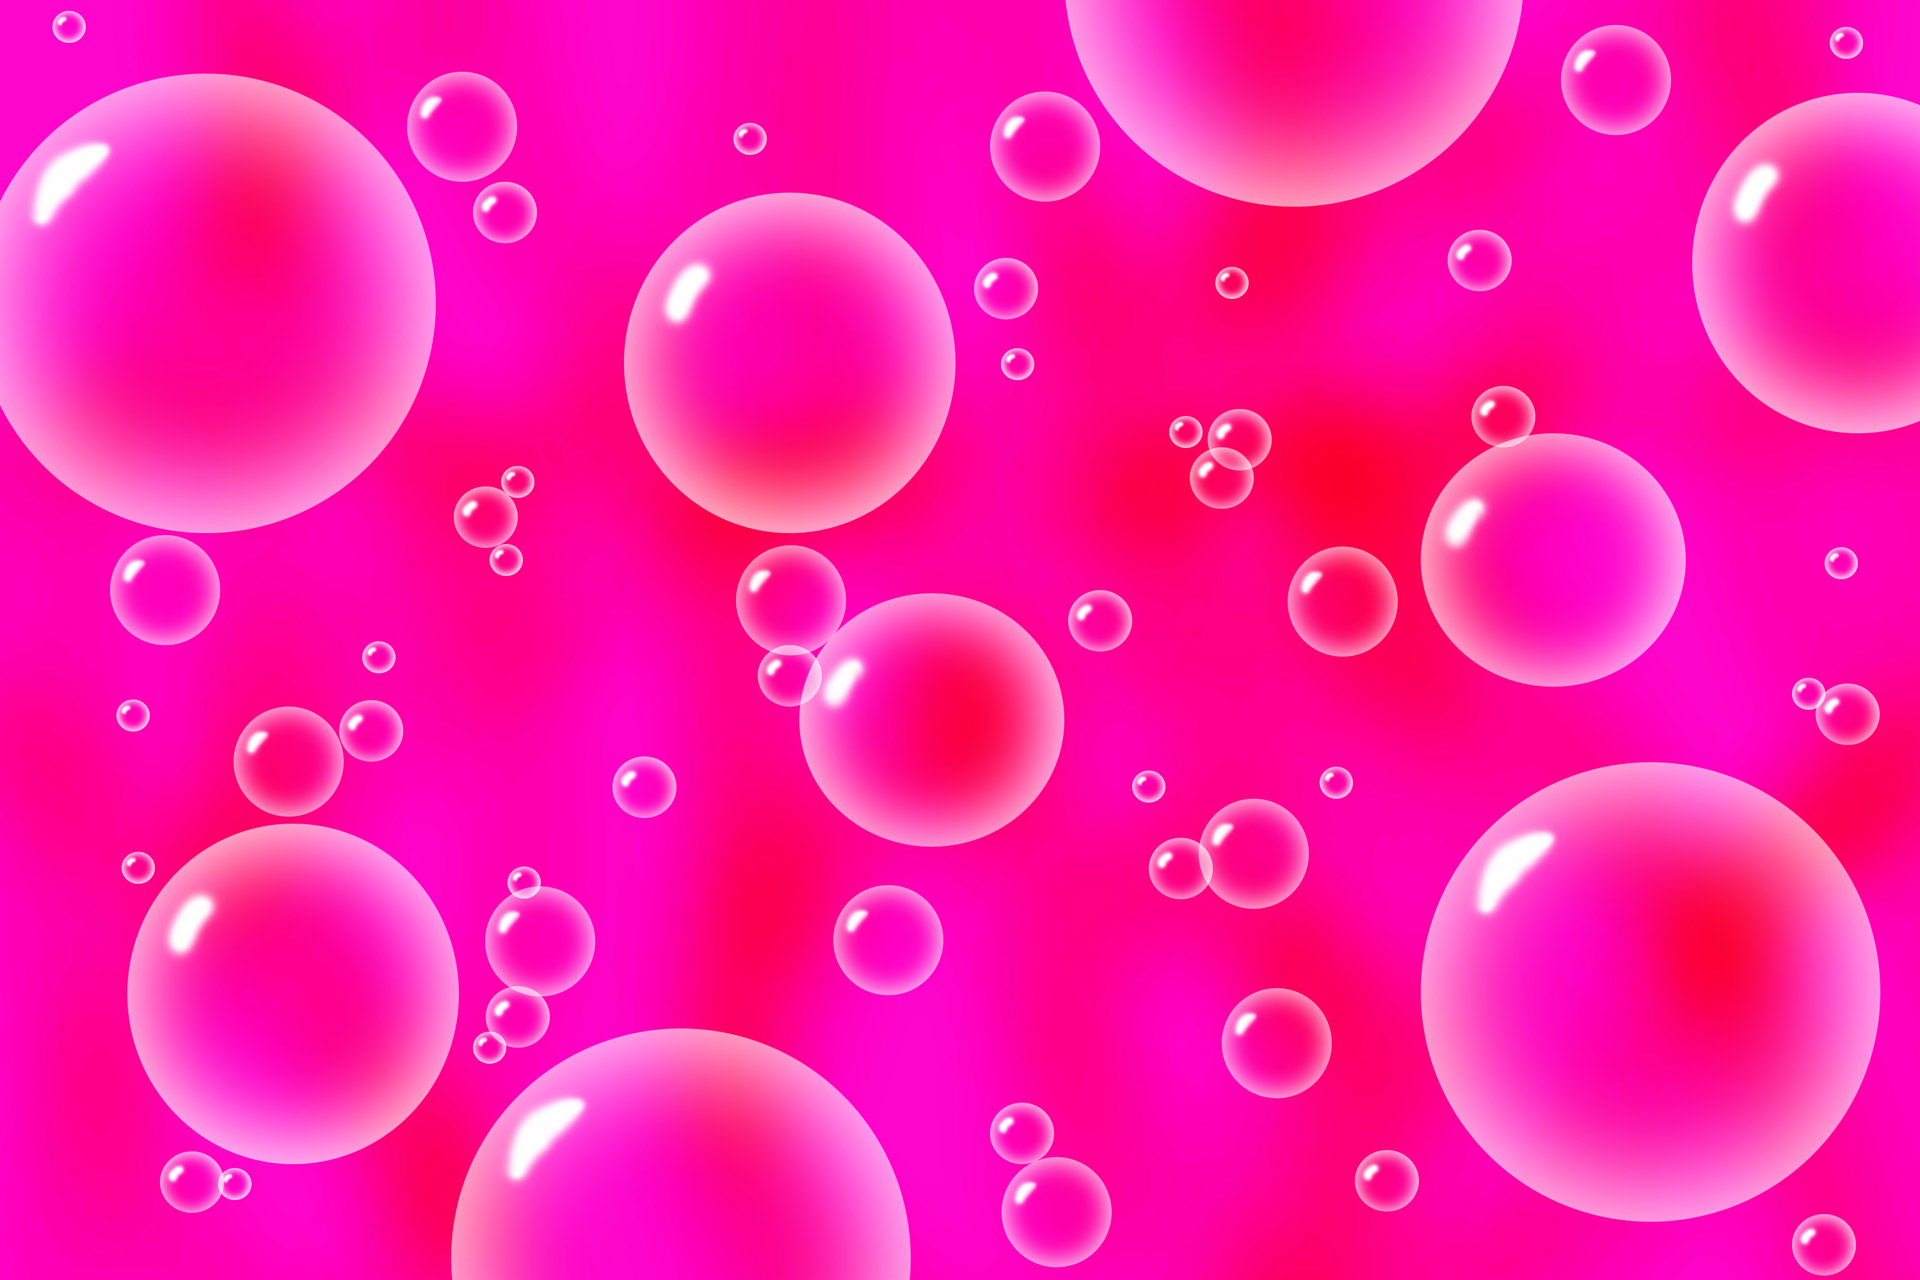 Bubbles On Pink Background Free Stock Photo HD   Public Domain